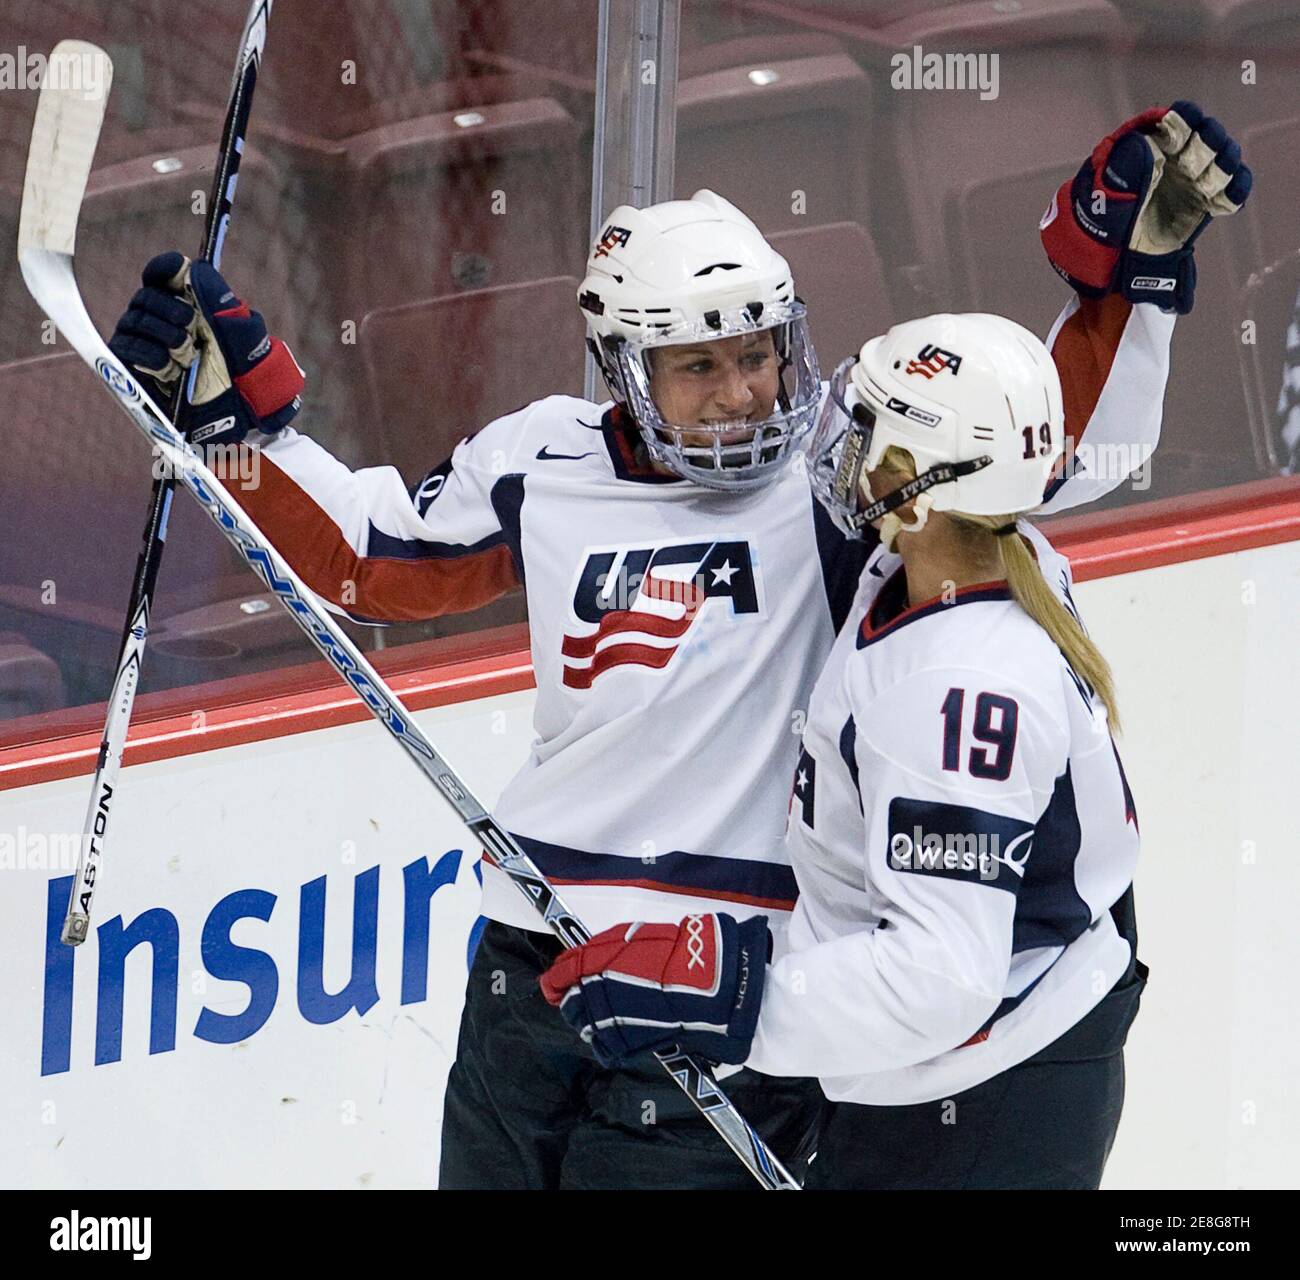 USA's Meghan Duggan (L) celebrates her goal against Finland with team mate Gigi Marvin during the first period of their semi-final Hockey Canada Cup game in Vancouver, British Columbia September 5, 2009. The IIHF exhibition tournament, which includes the top four women's teams from Canada, Sweden, Finland and the USA, is a test event for the upcoming 2010 Olympics.        REUTERS/Andy Clark     (CANADA SPORT ICE HOCKEY) Stock Photo